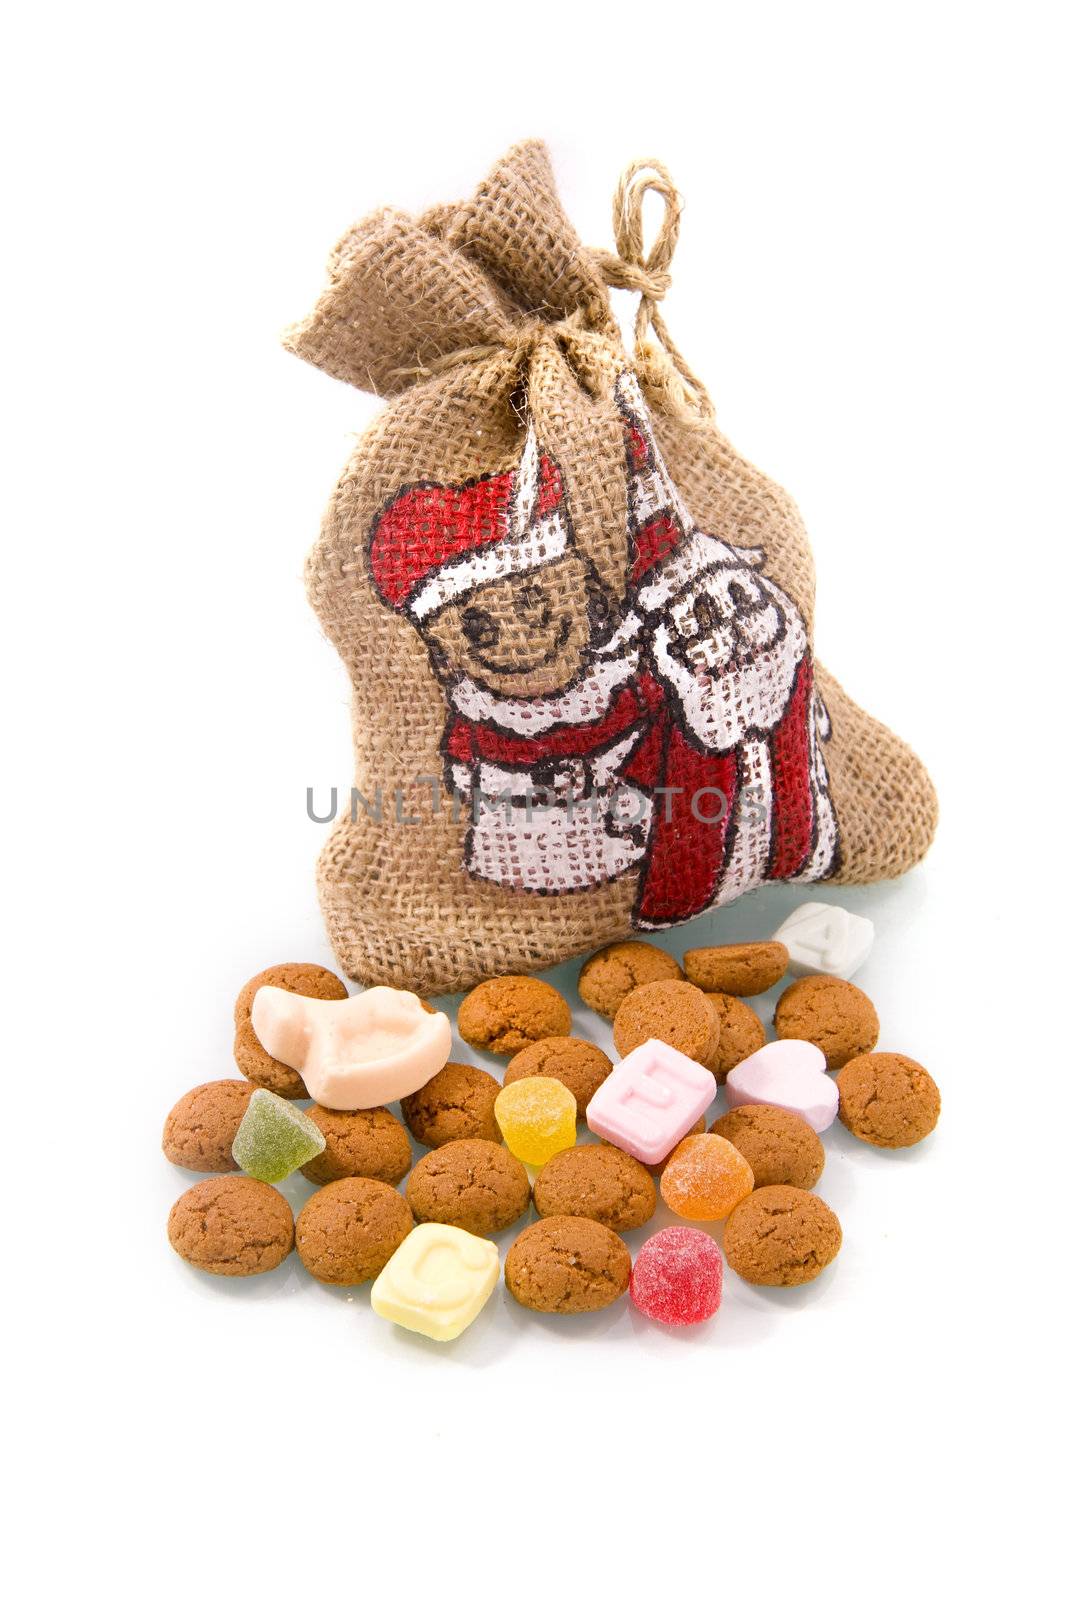 nuts with a bag for 'Sinterklaas', a dutch tradition